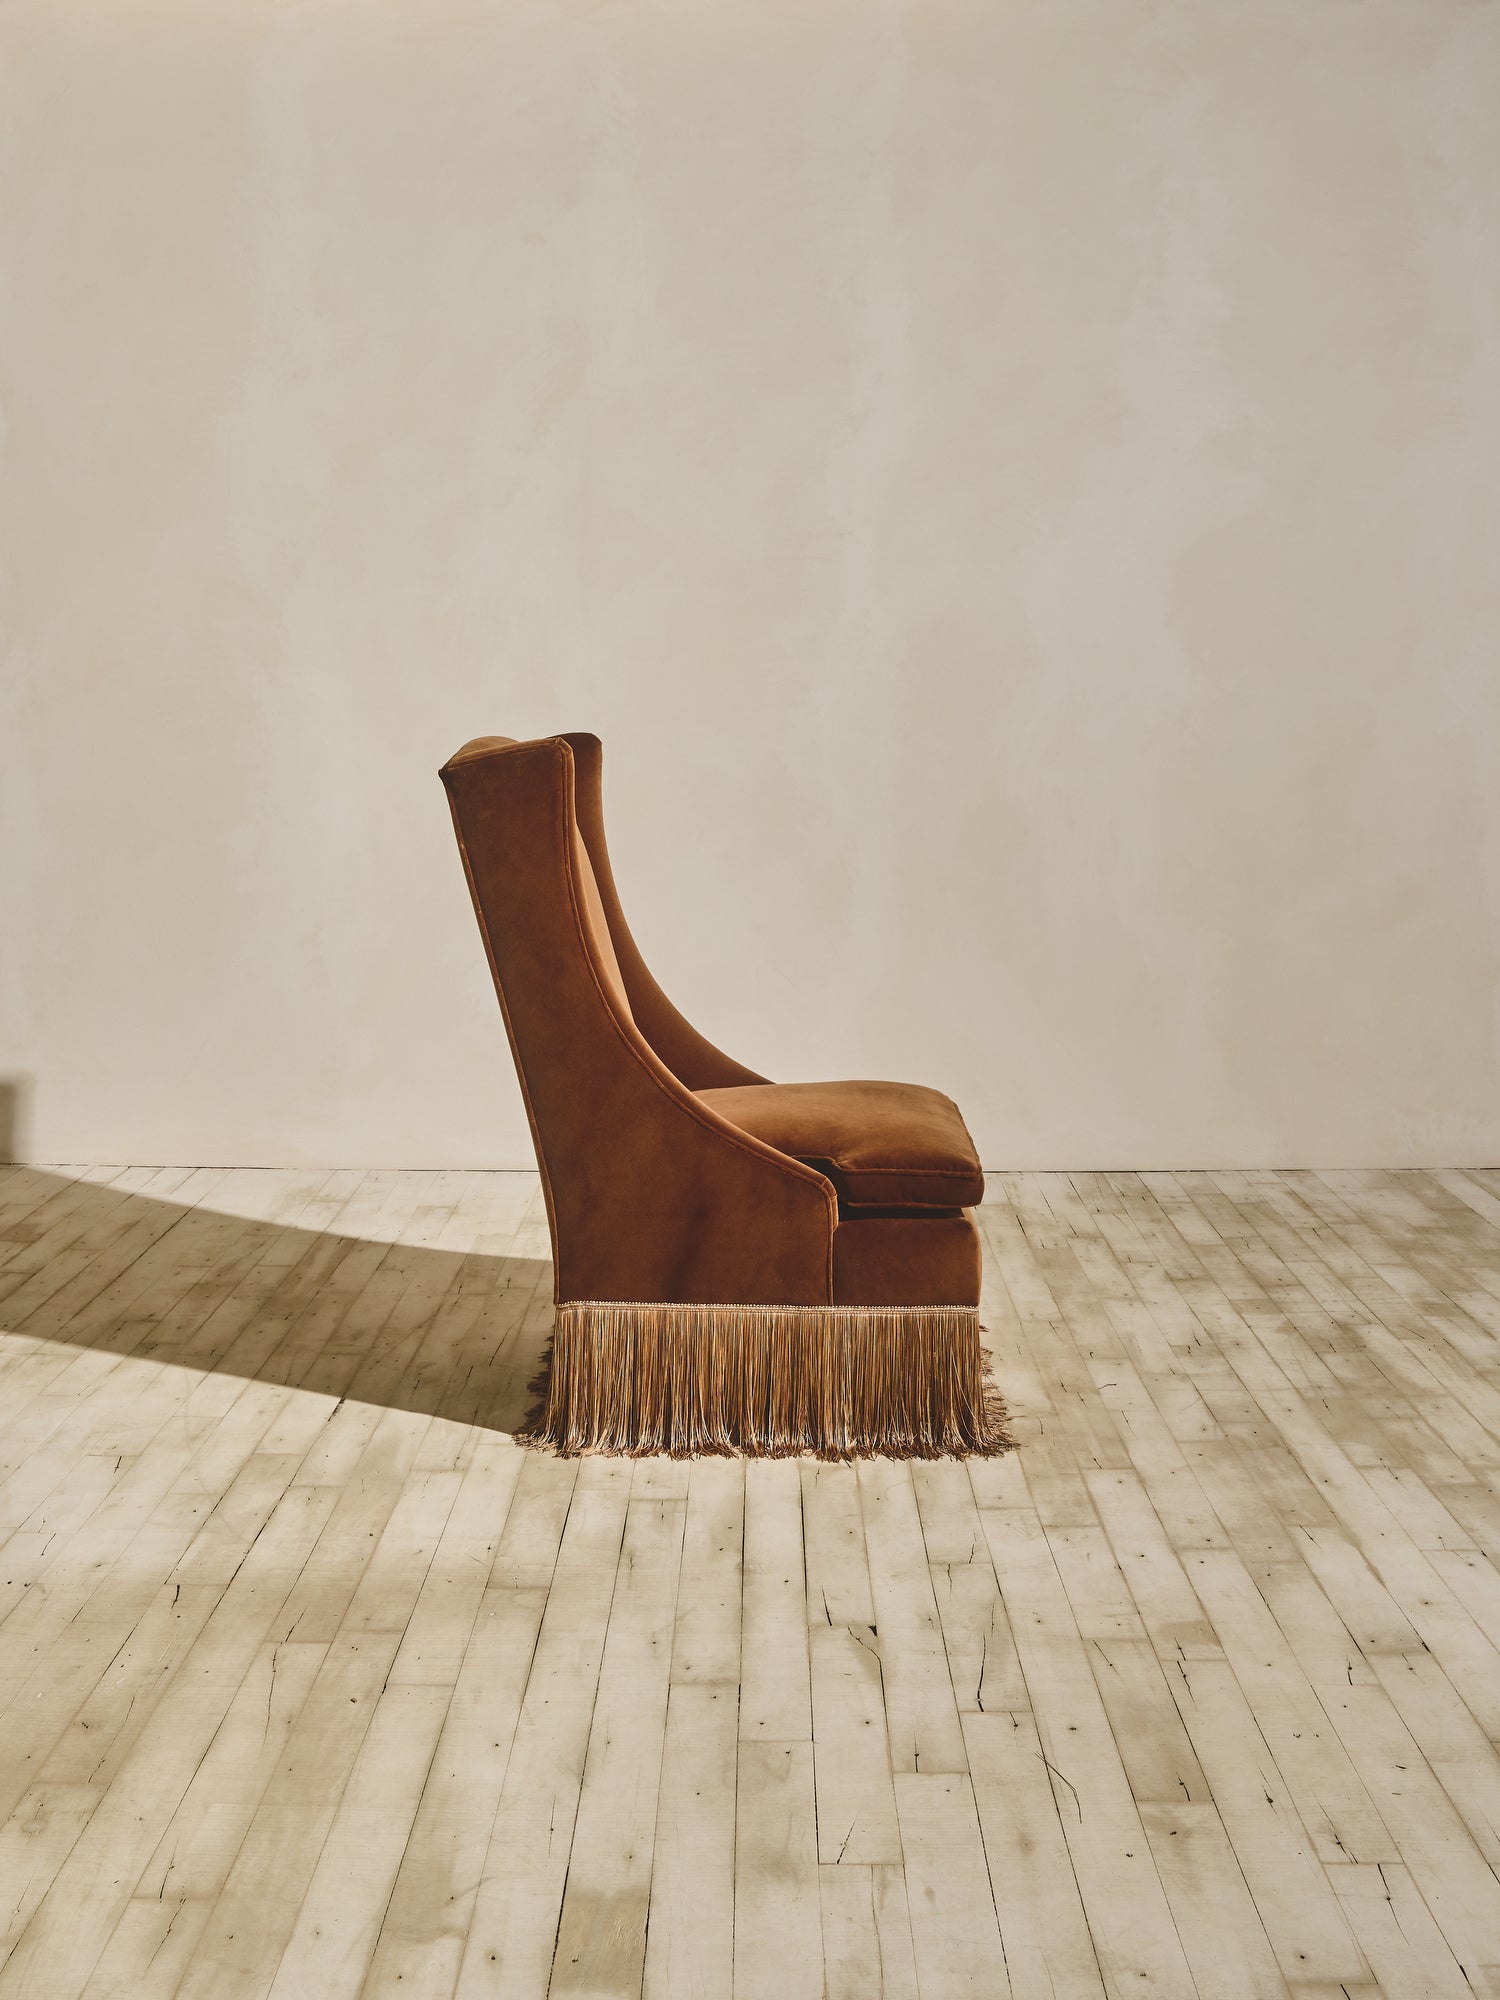 Side view of the Pavillion Chair with high back winged chair shown in our ochre fabric paired with our bronze fringe.